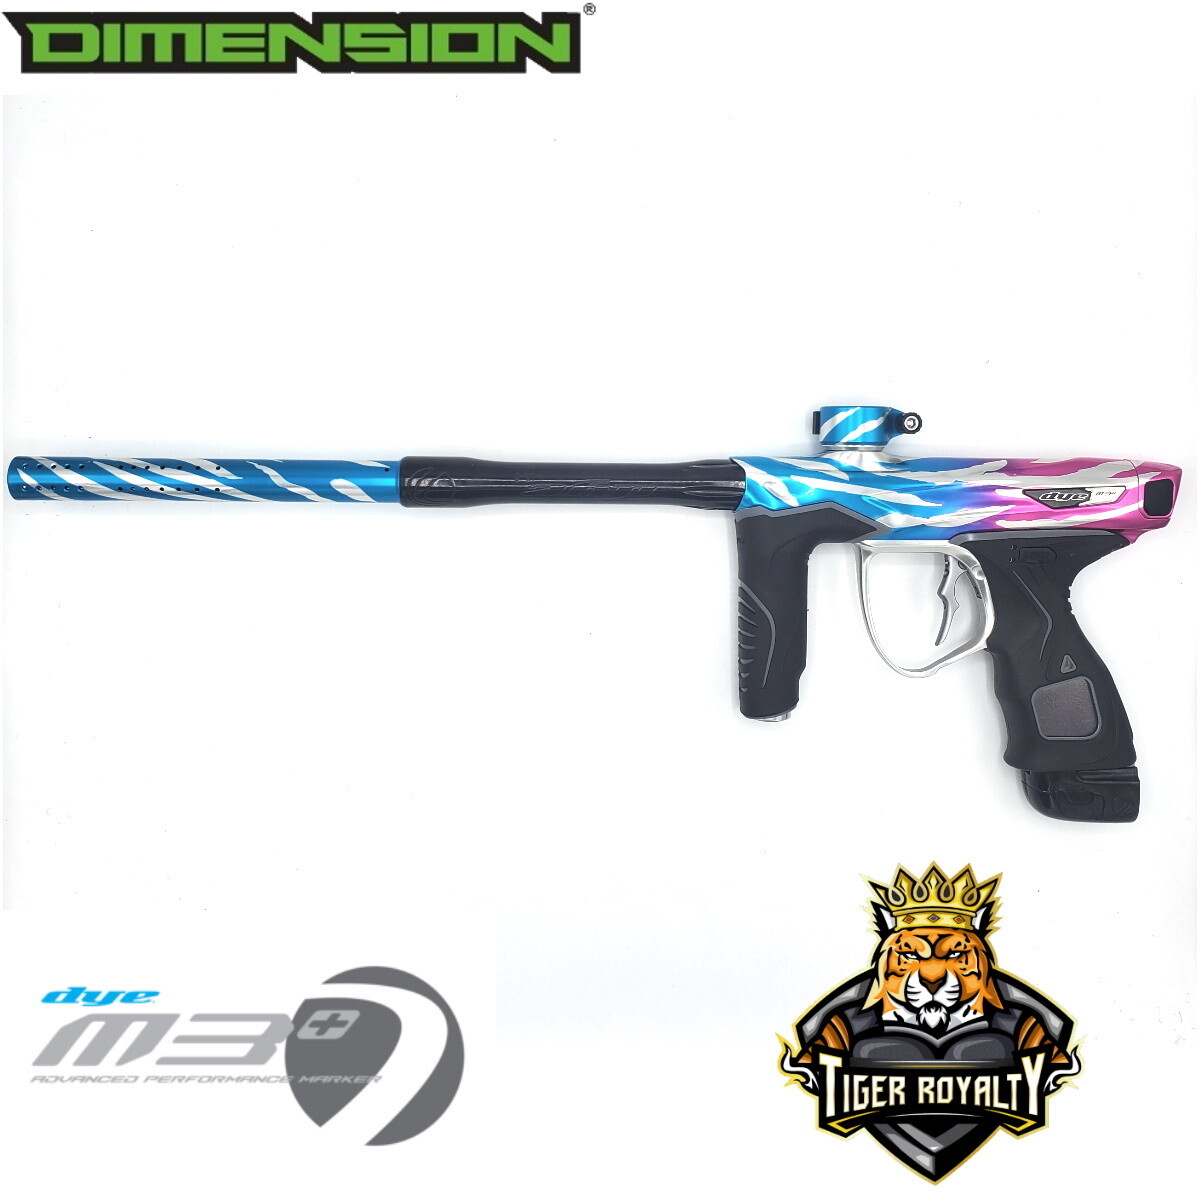 Dye M3+ - Dimension Limited Edition 1 of 1 / Tiger Royalty - Carnival Candy